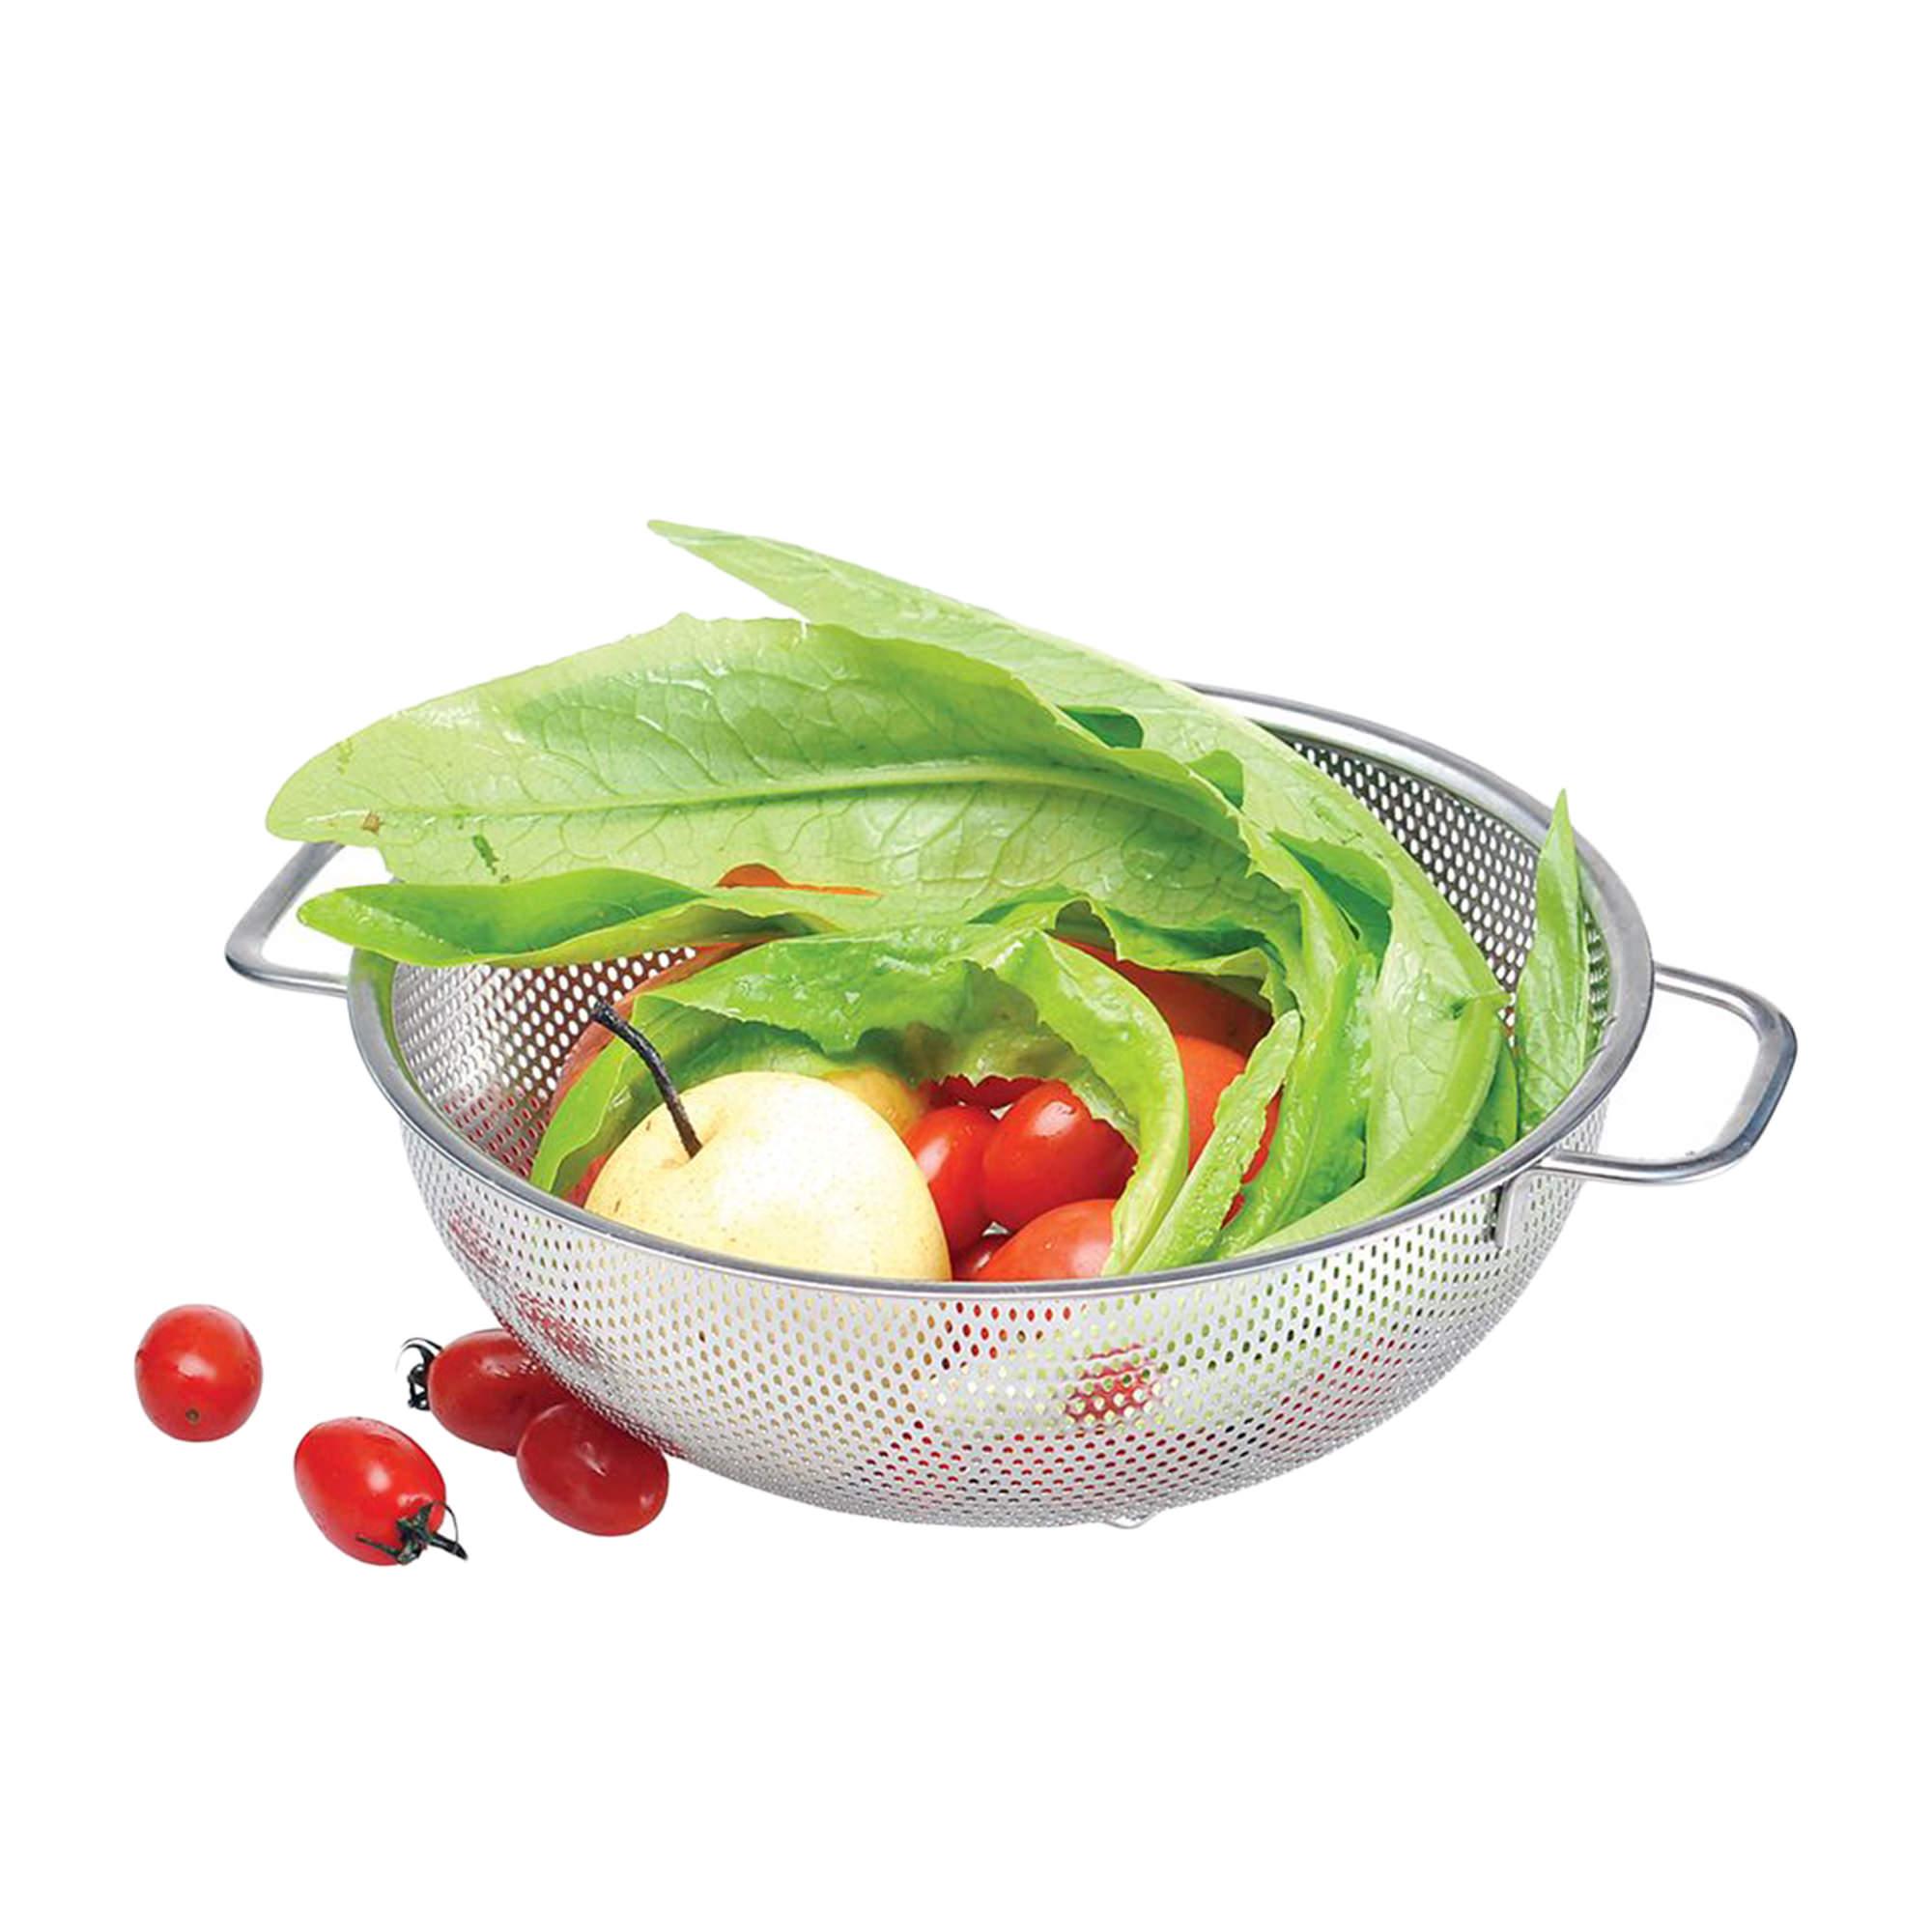 Appetito Perforated Colander 22cm Stainless Steel Image 2